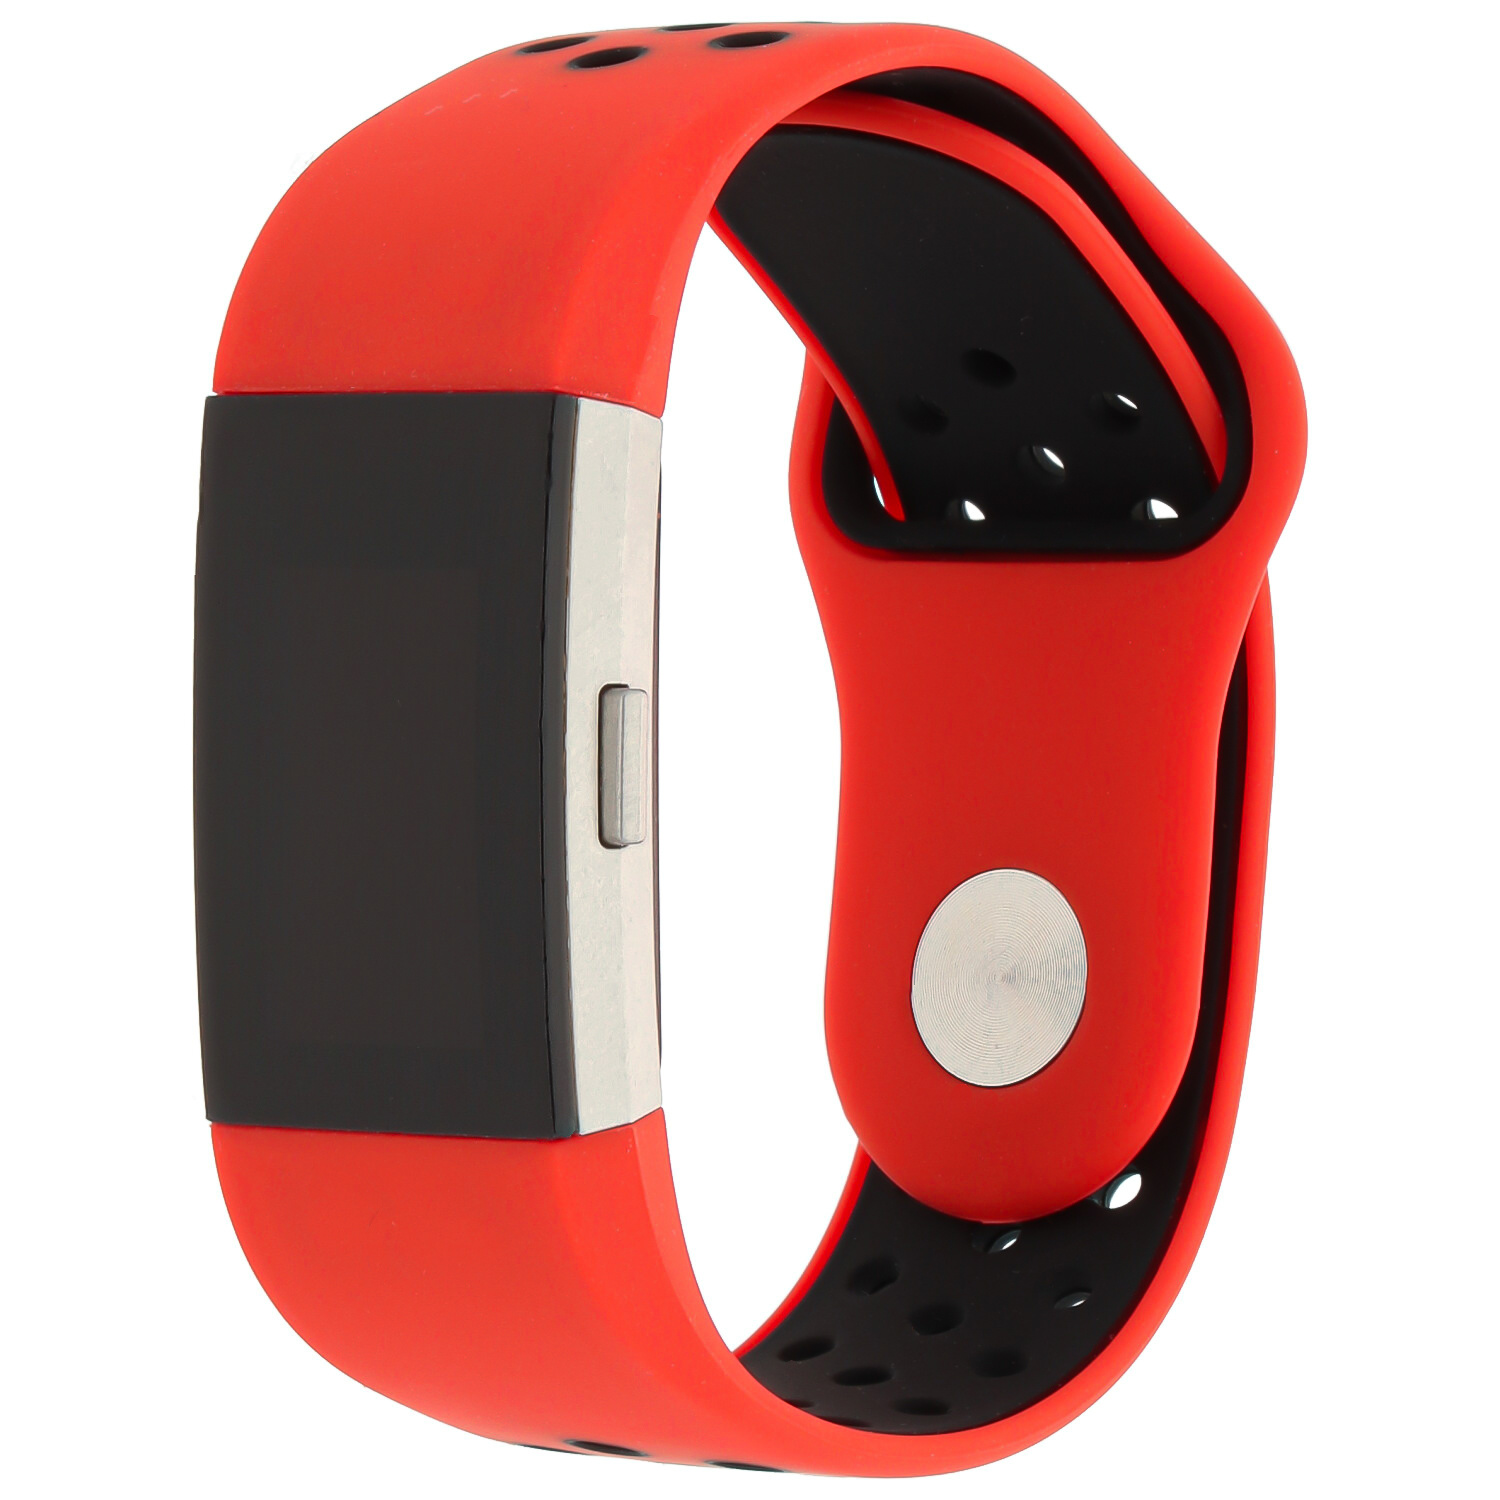 Goedkope Fitbit charge sport band - rood zwart - 123watches B.V.